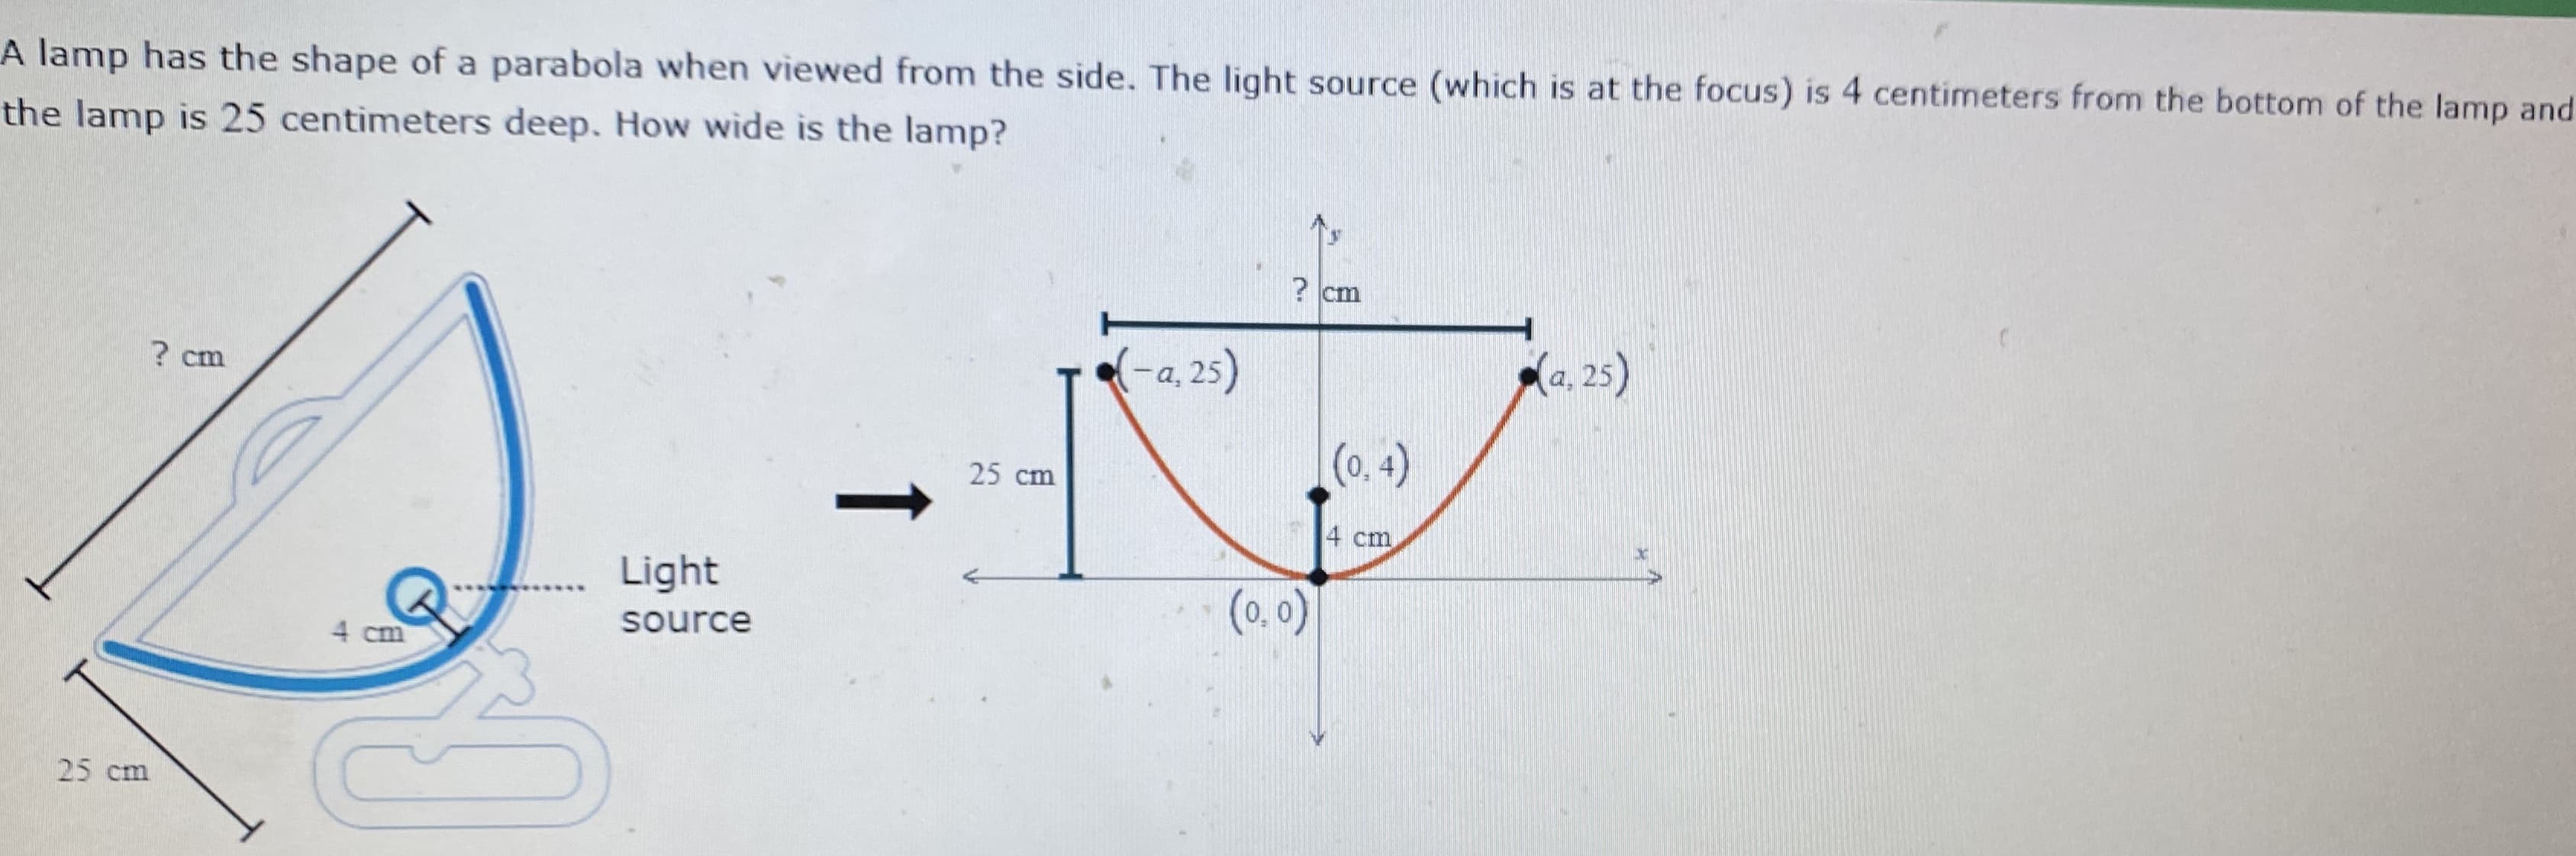 A lamp has the shape of a parabola when viewed from the side. The light source (which is at the focus) is 4 centimeters from the bottom of the lamp and
the lamp is 25 centimeters deep. How wide is the lamp?
